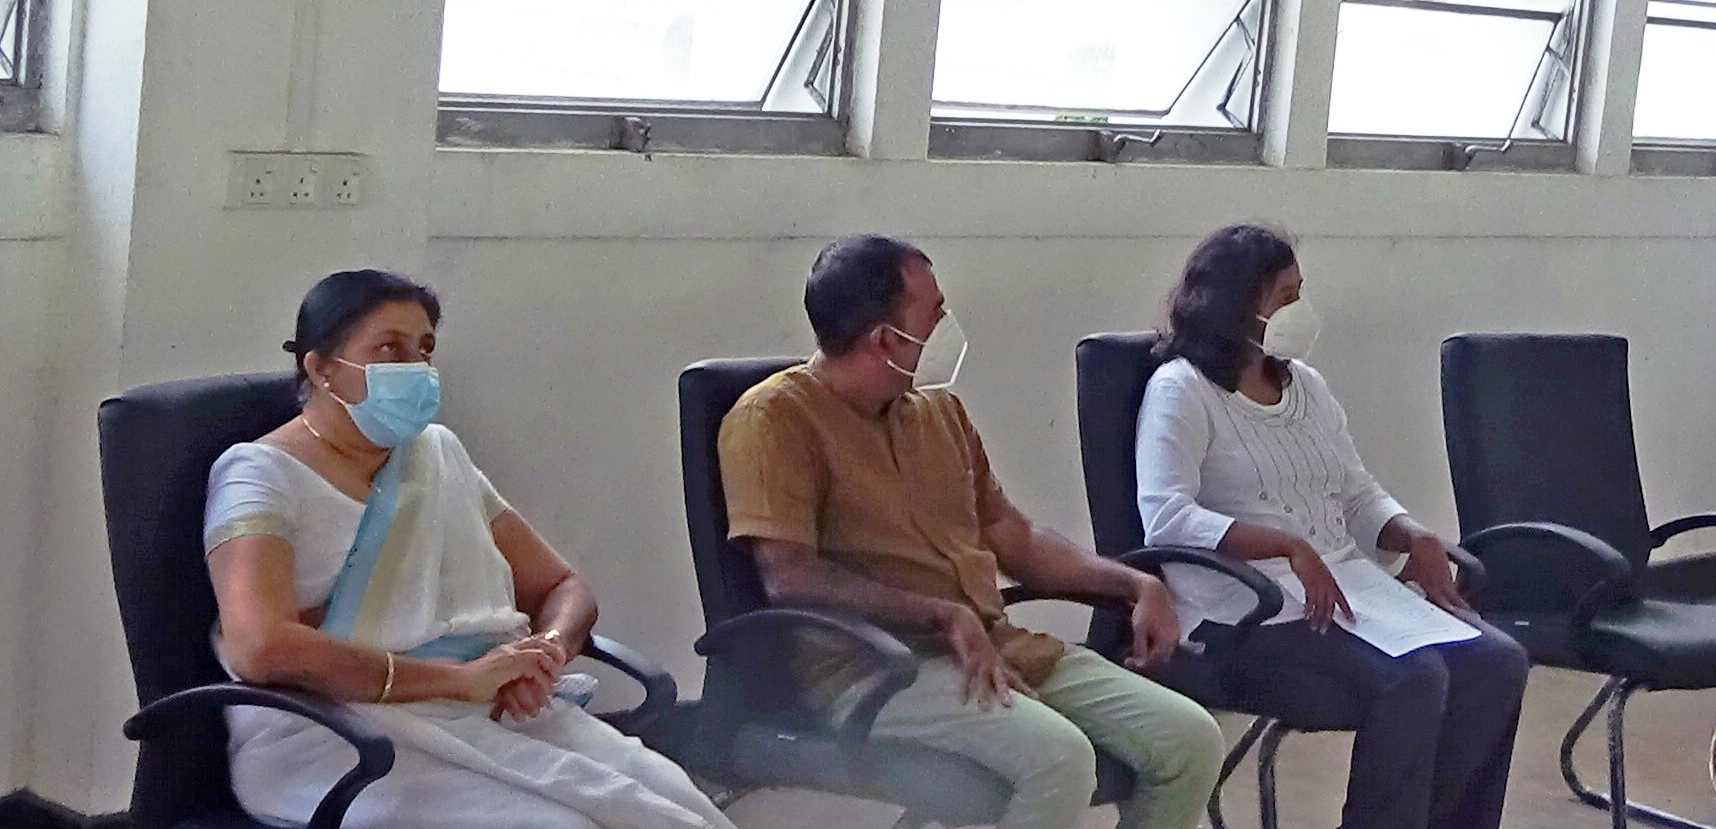 Mindfulness Practice - facilitated by three members of the Sati-Group-Kandy